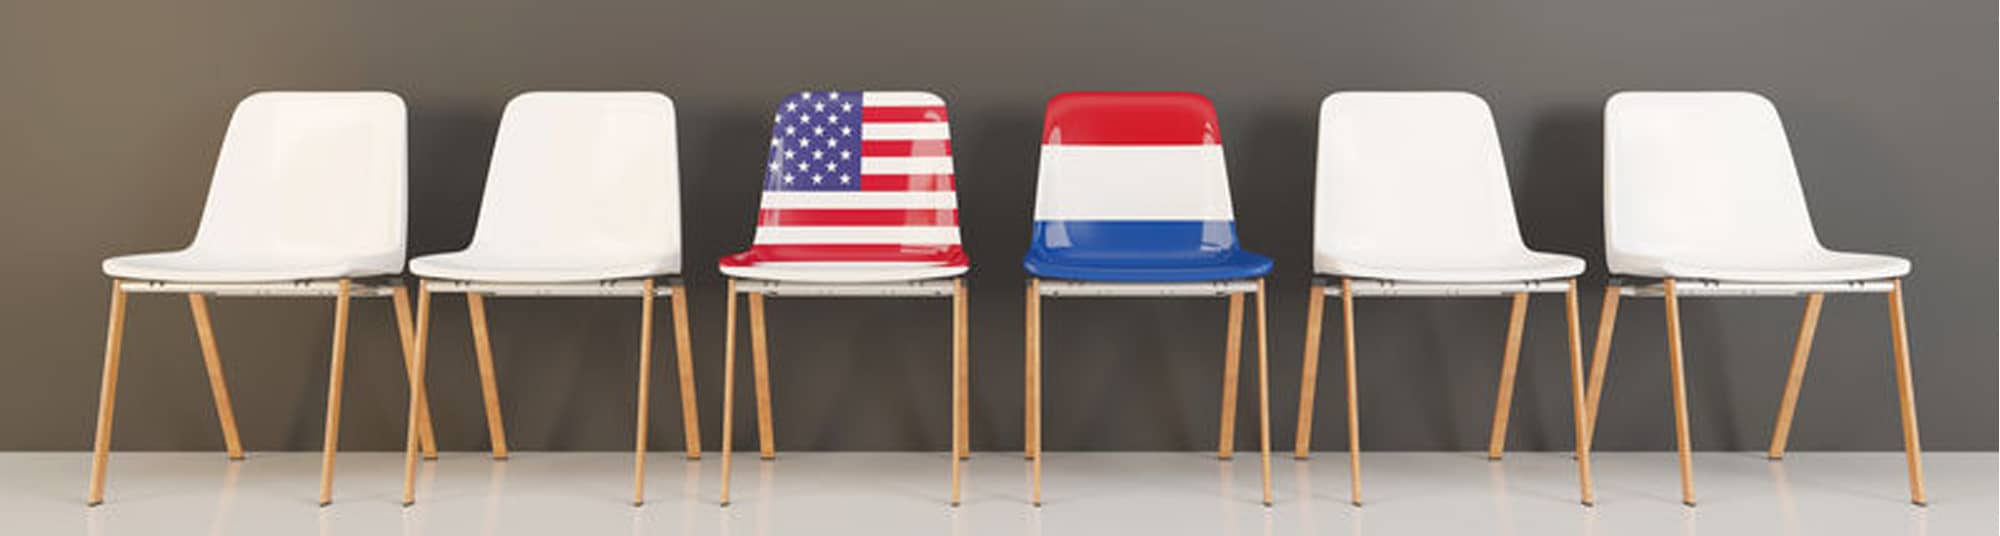 Bol International's dedicated US-Netherlands desk delivers the solutions you need.